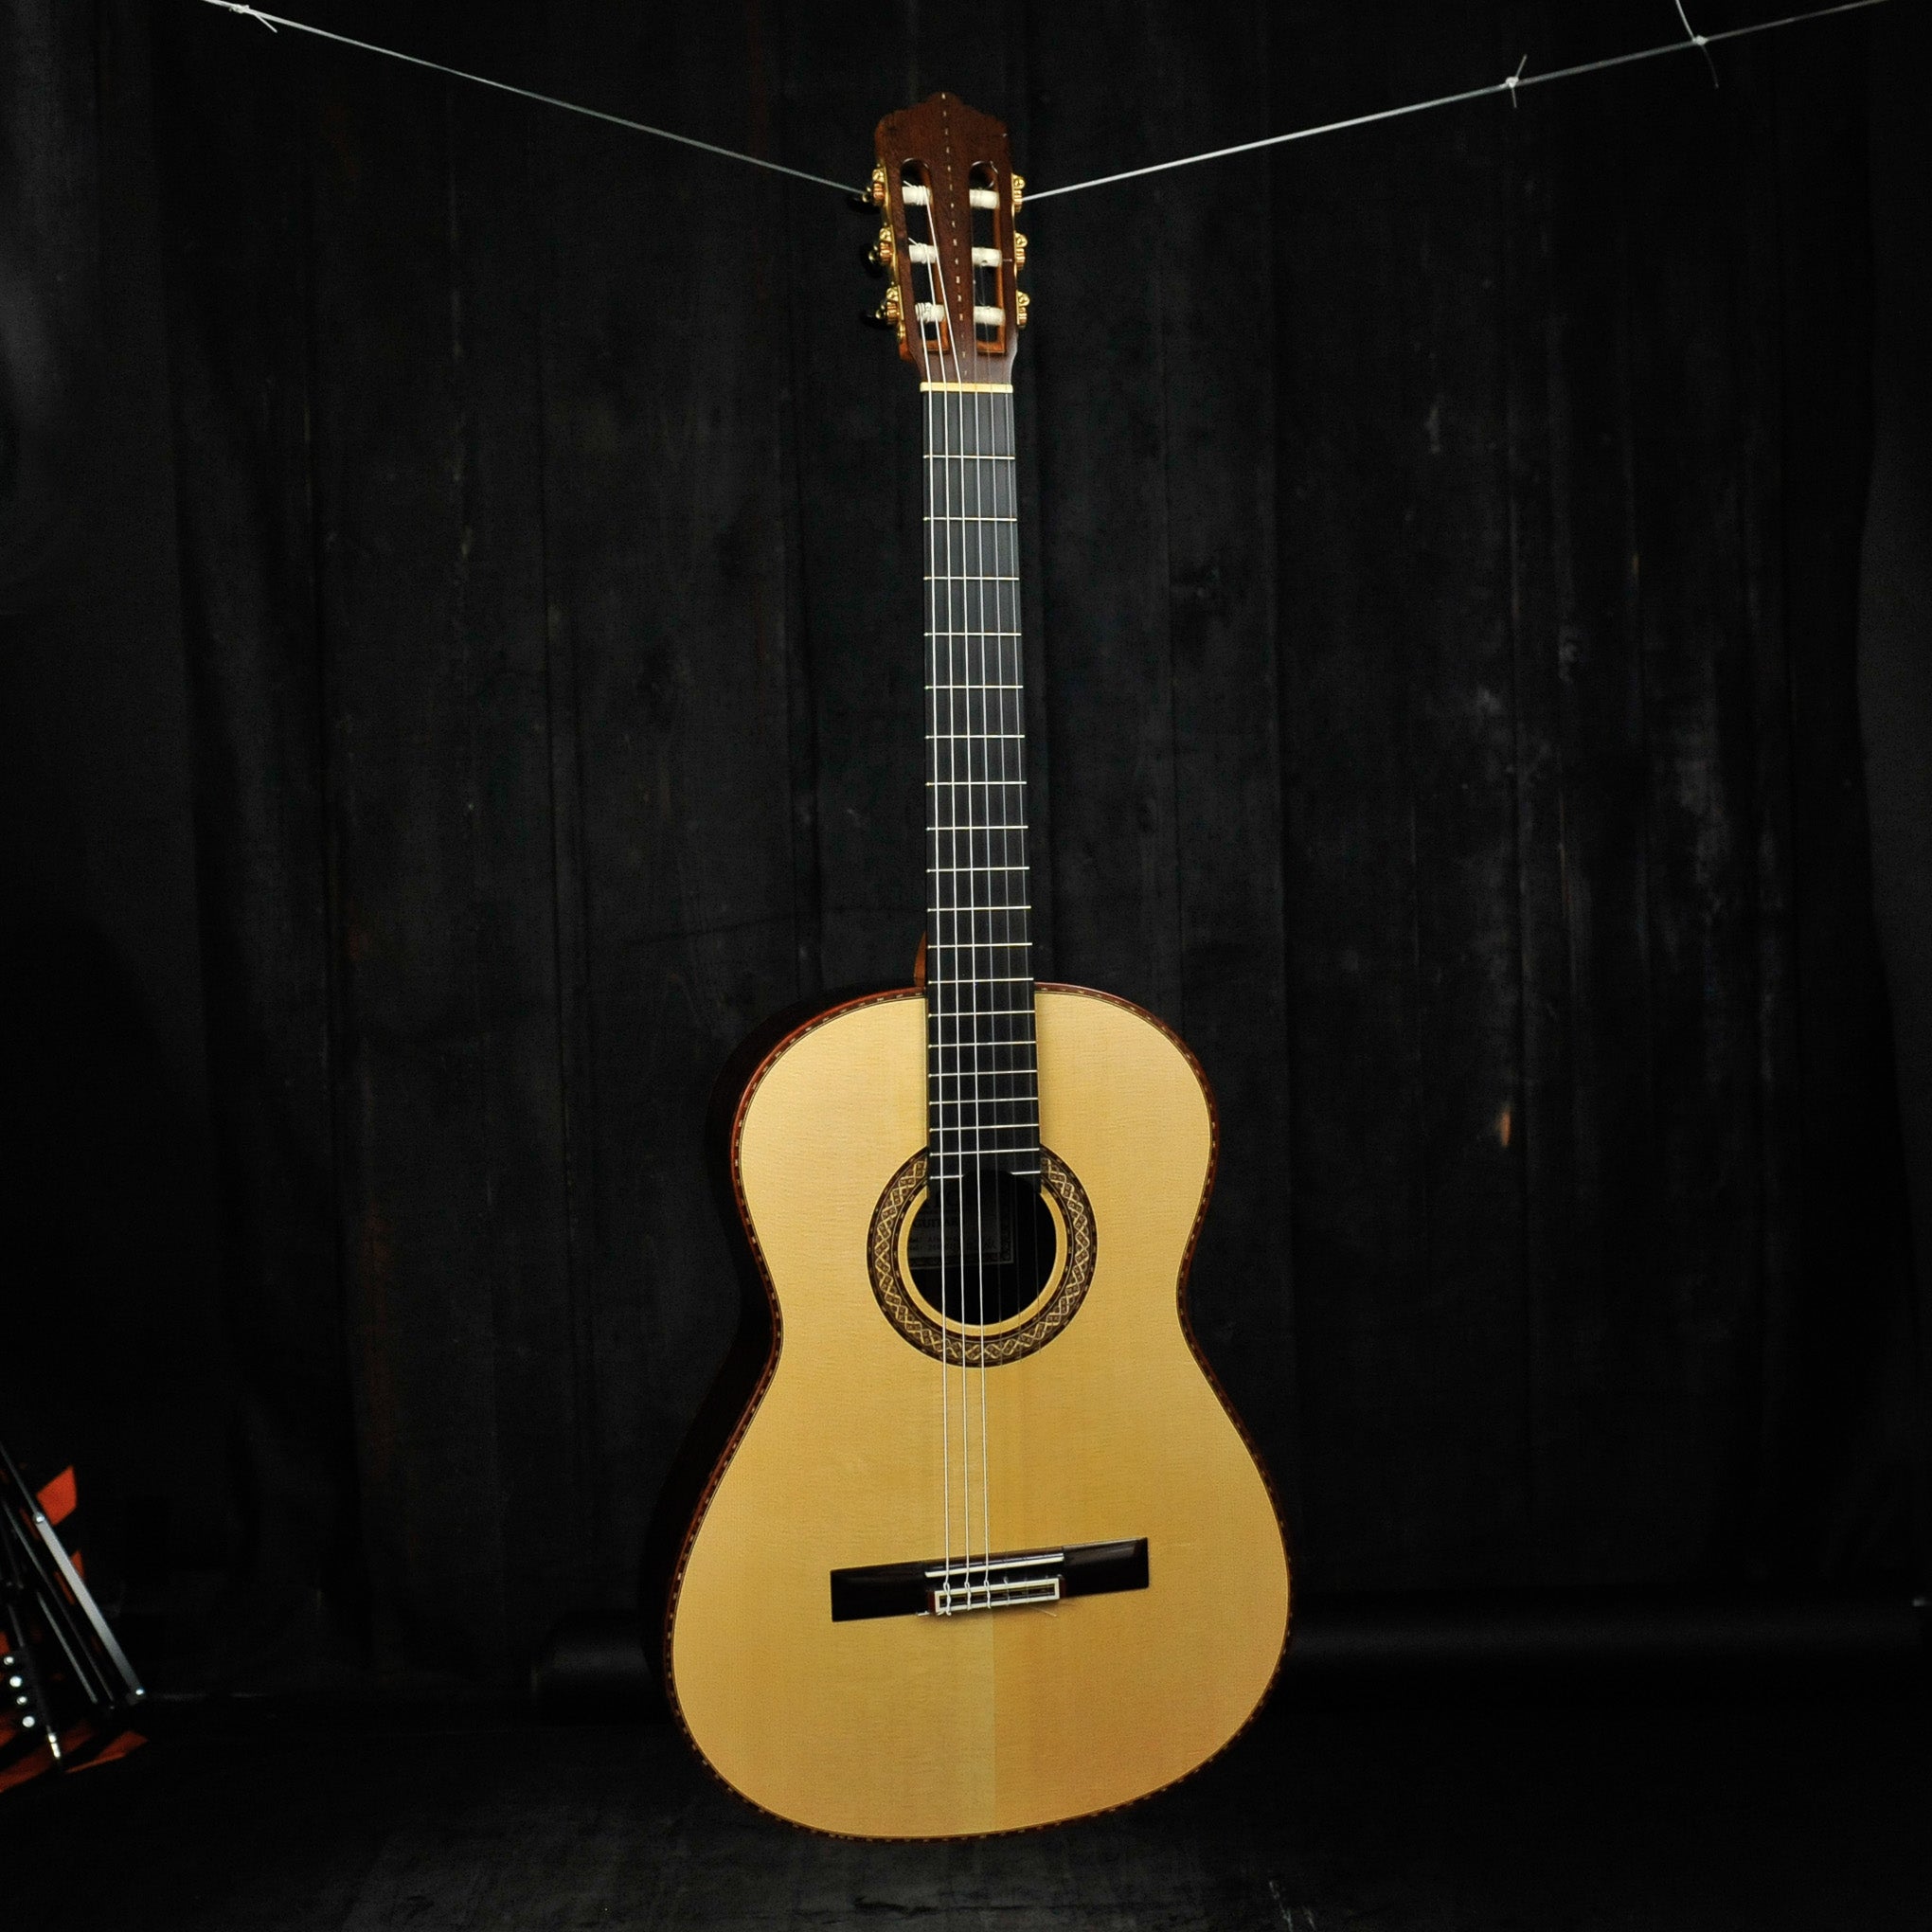 J. Godoy by Katoh Albatross Classical Guitar Spruce/Indian Rosewood